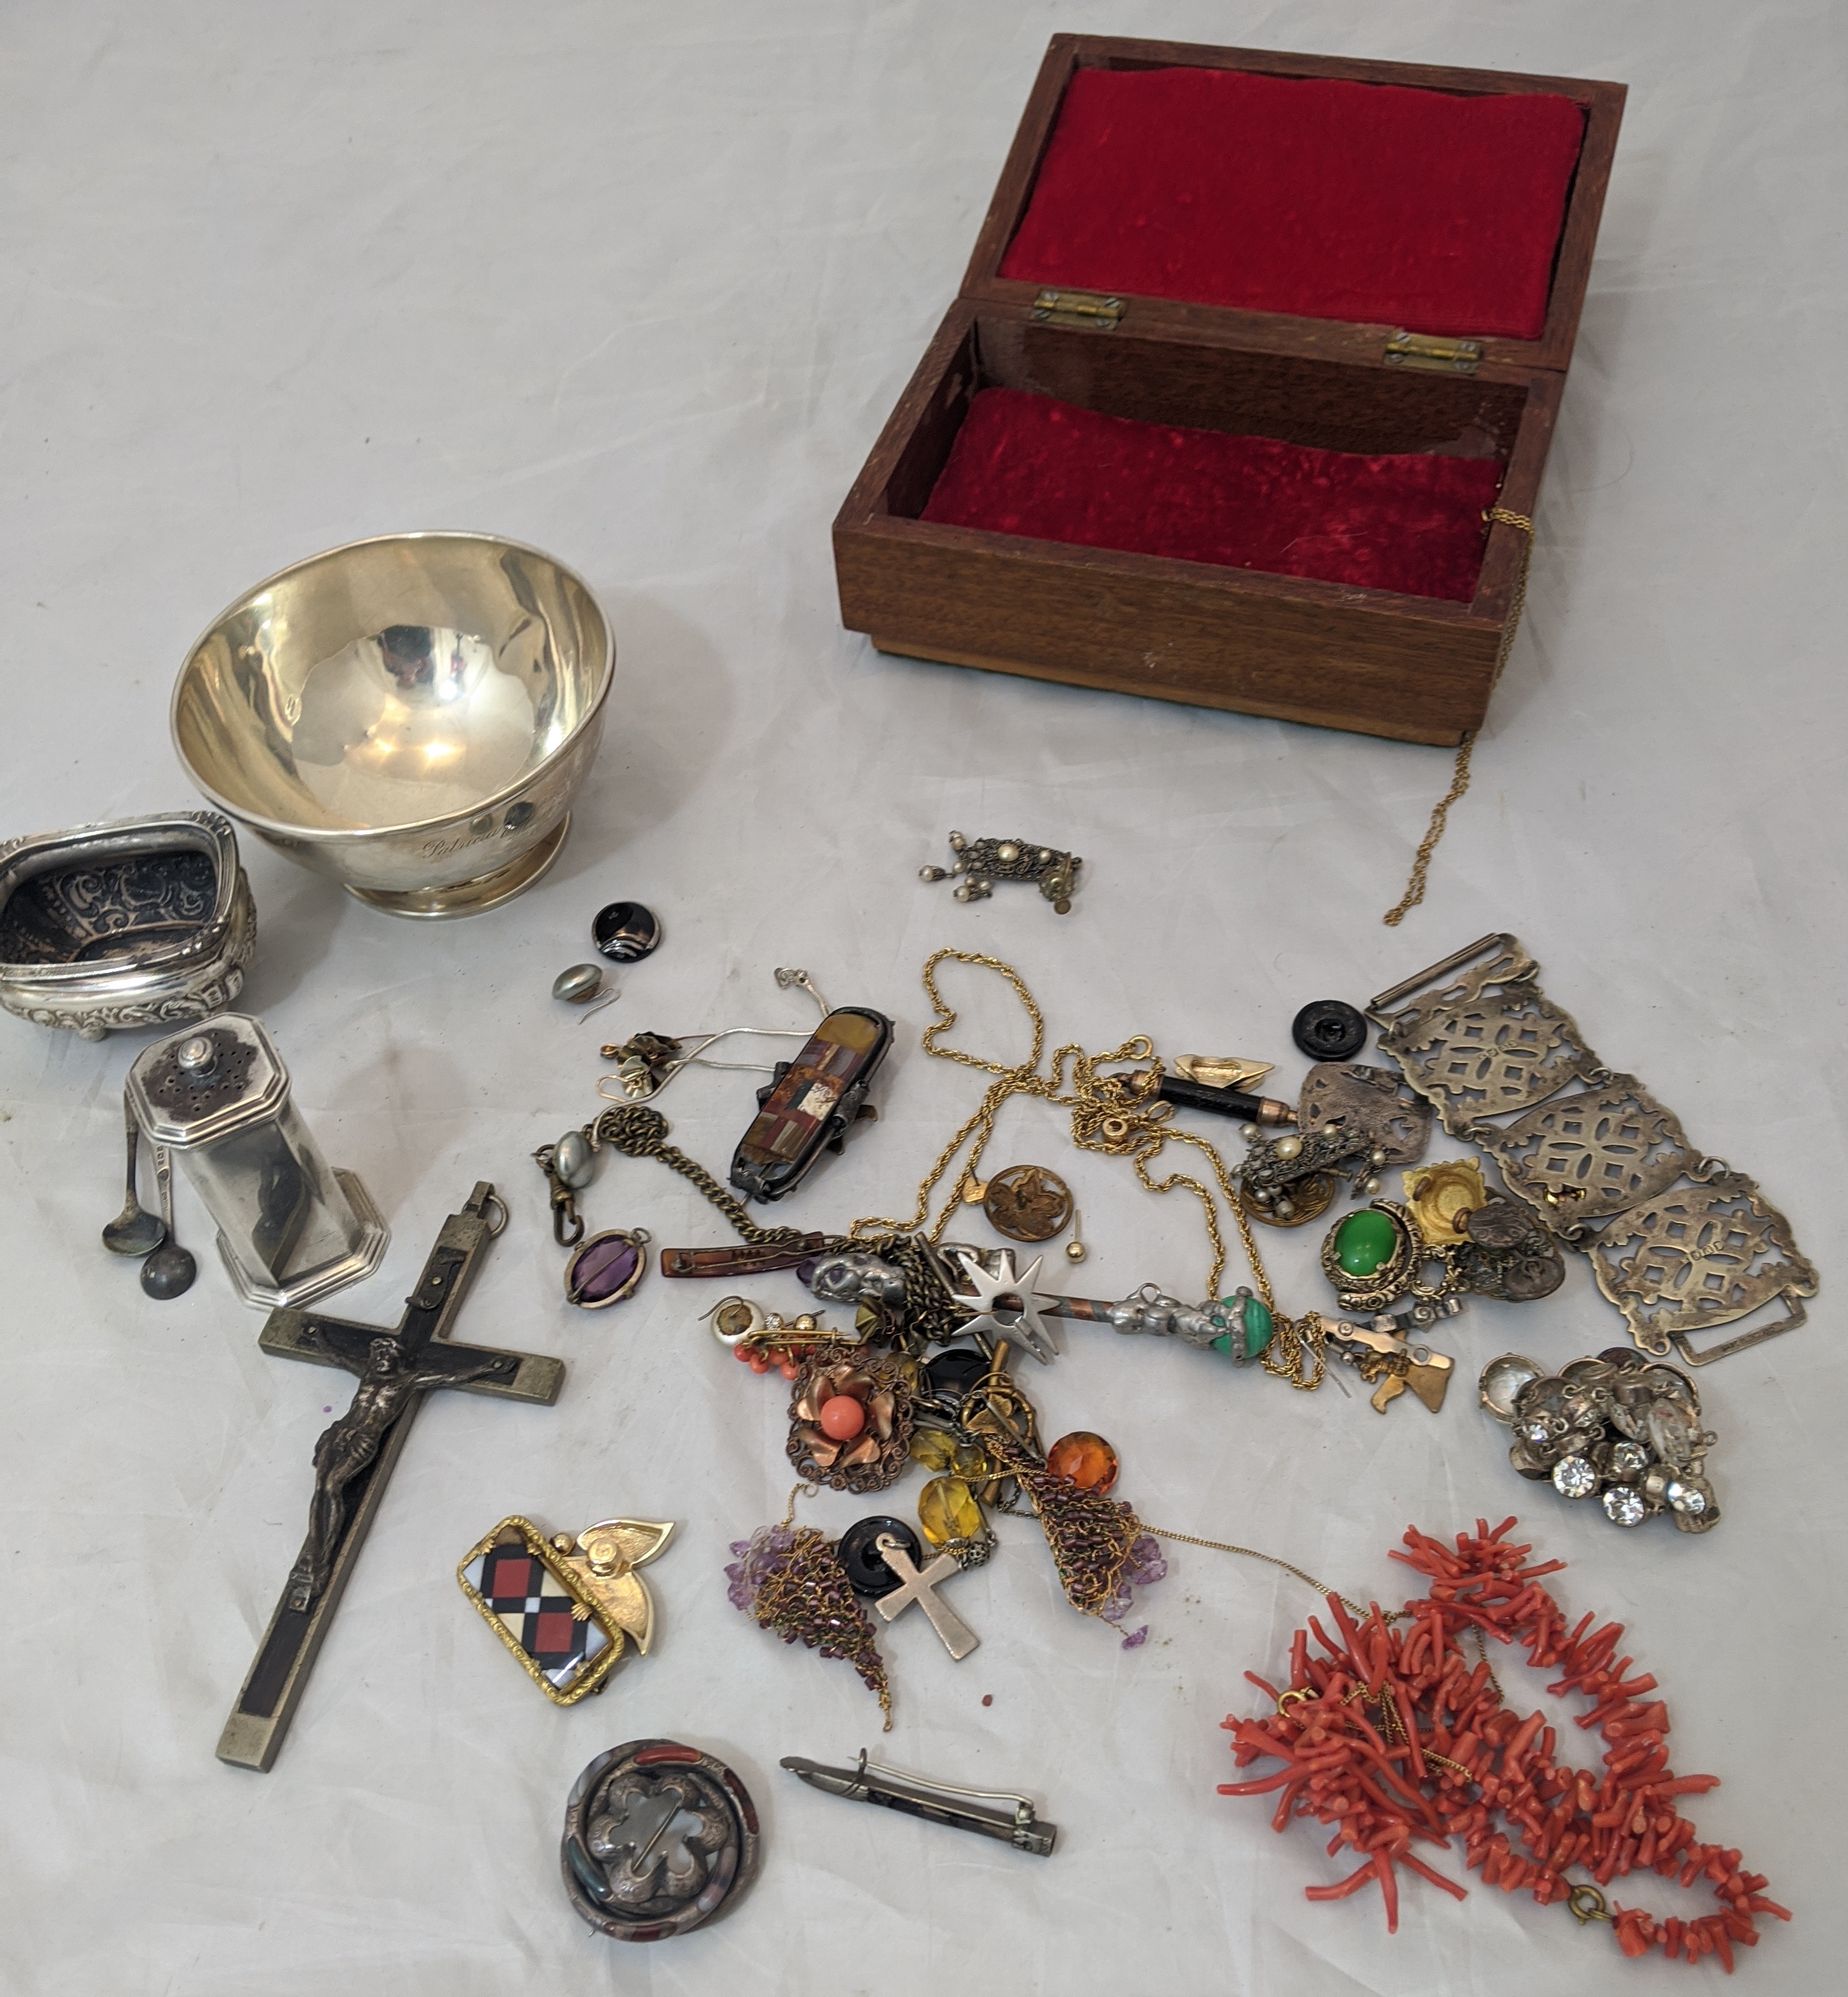 A collection of jewellery items, to include coral, broaches, earrings, belt buckles, together with a